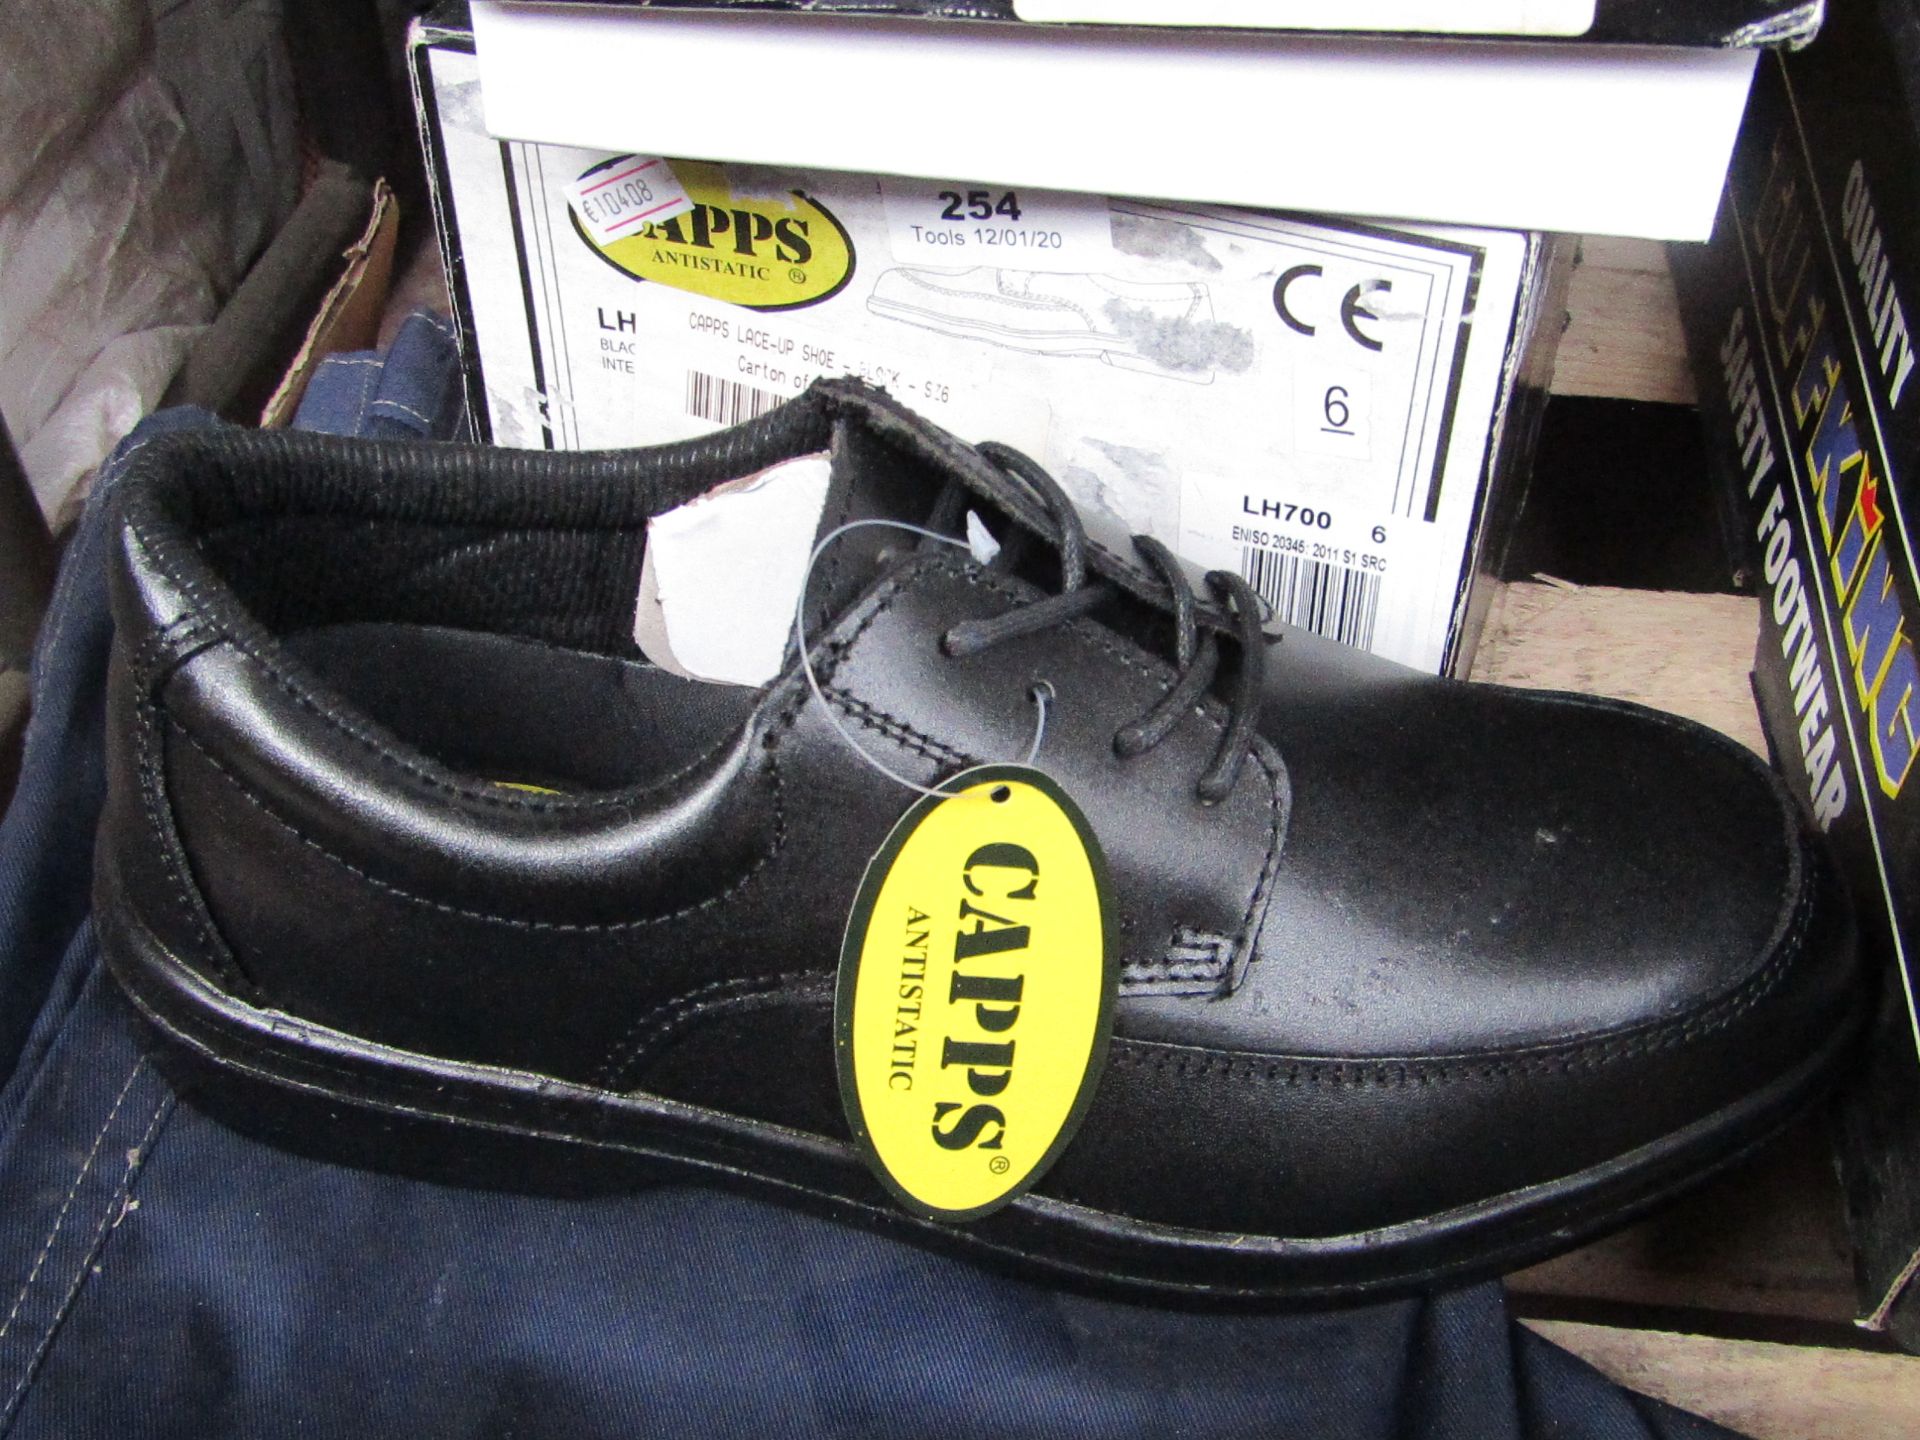 capps safety footwear size 6, new and boxed